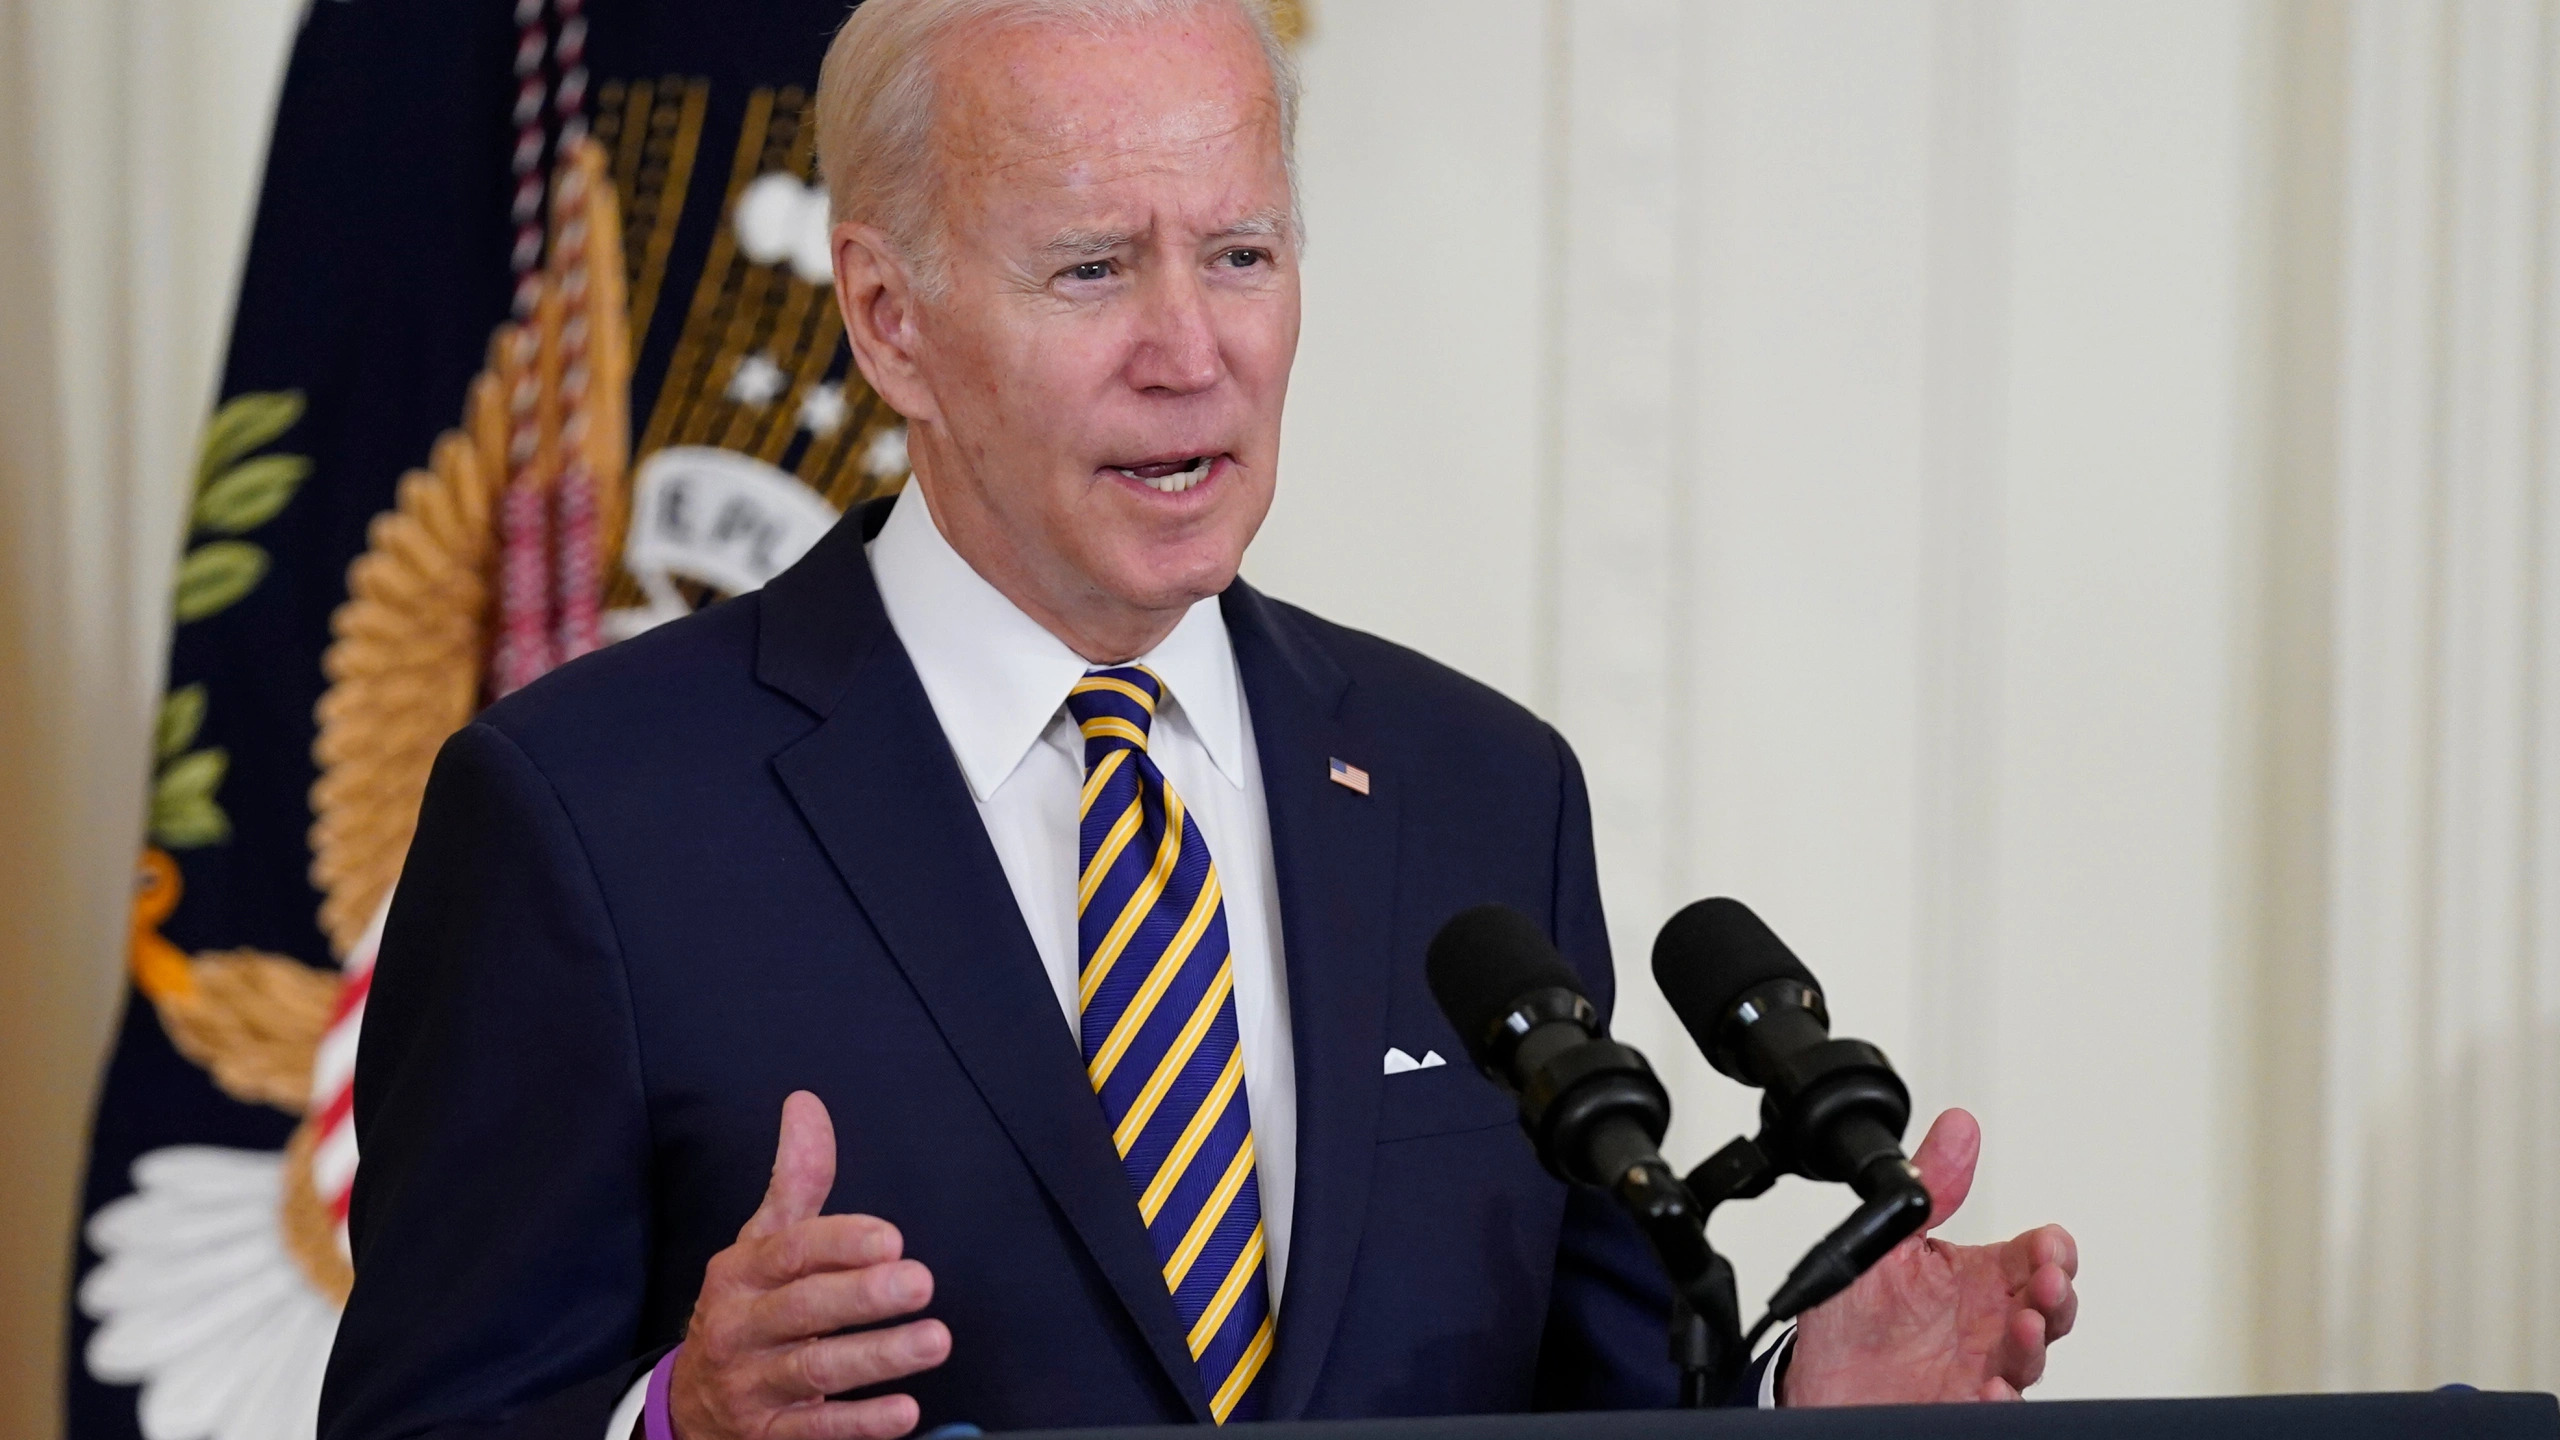 United States President Joe Biden declared on Wednesday that he would cancel up to $10,000 in student loans for people earning less than $125,000 per year.